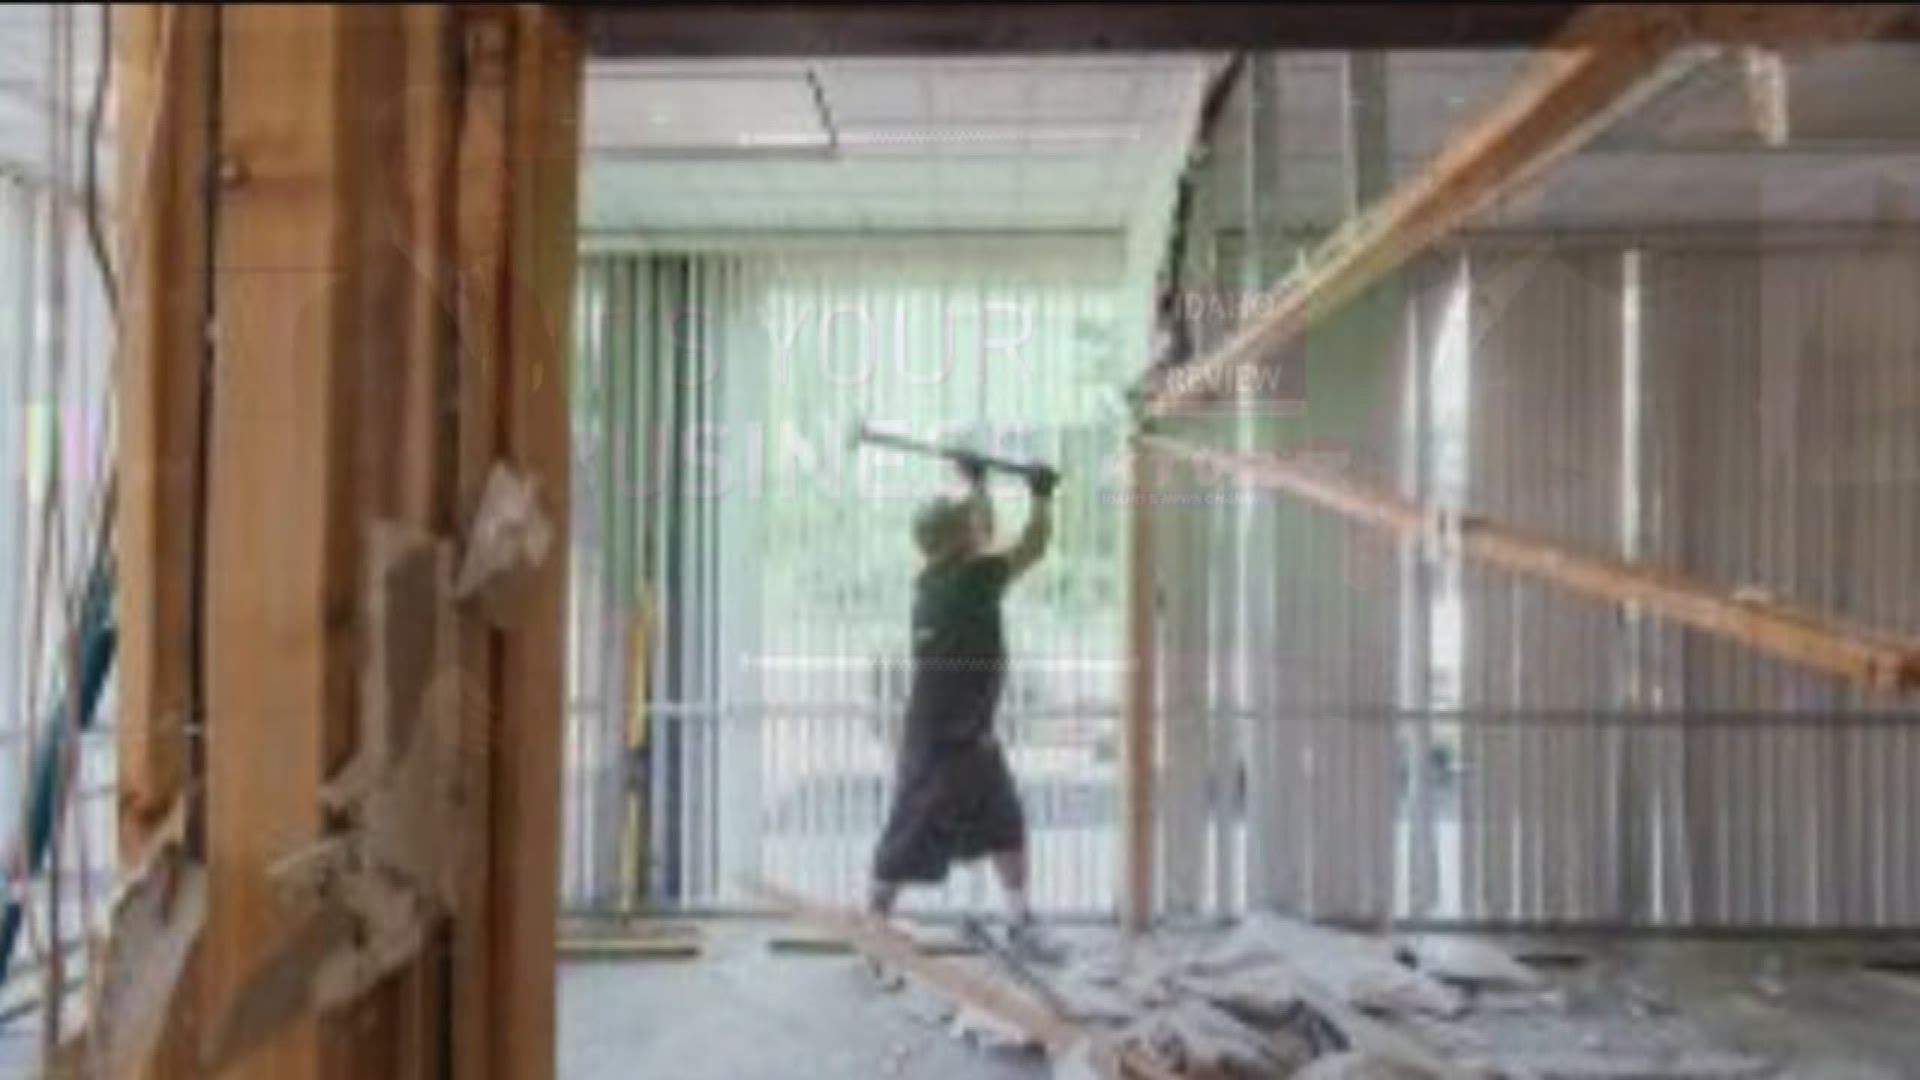 Some new art studios are being built in Boise.